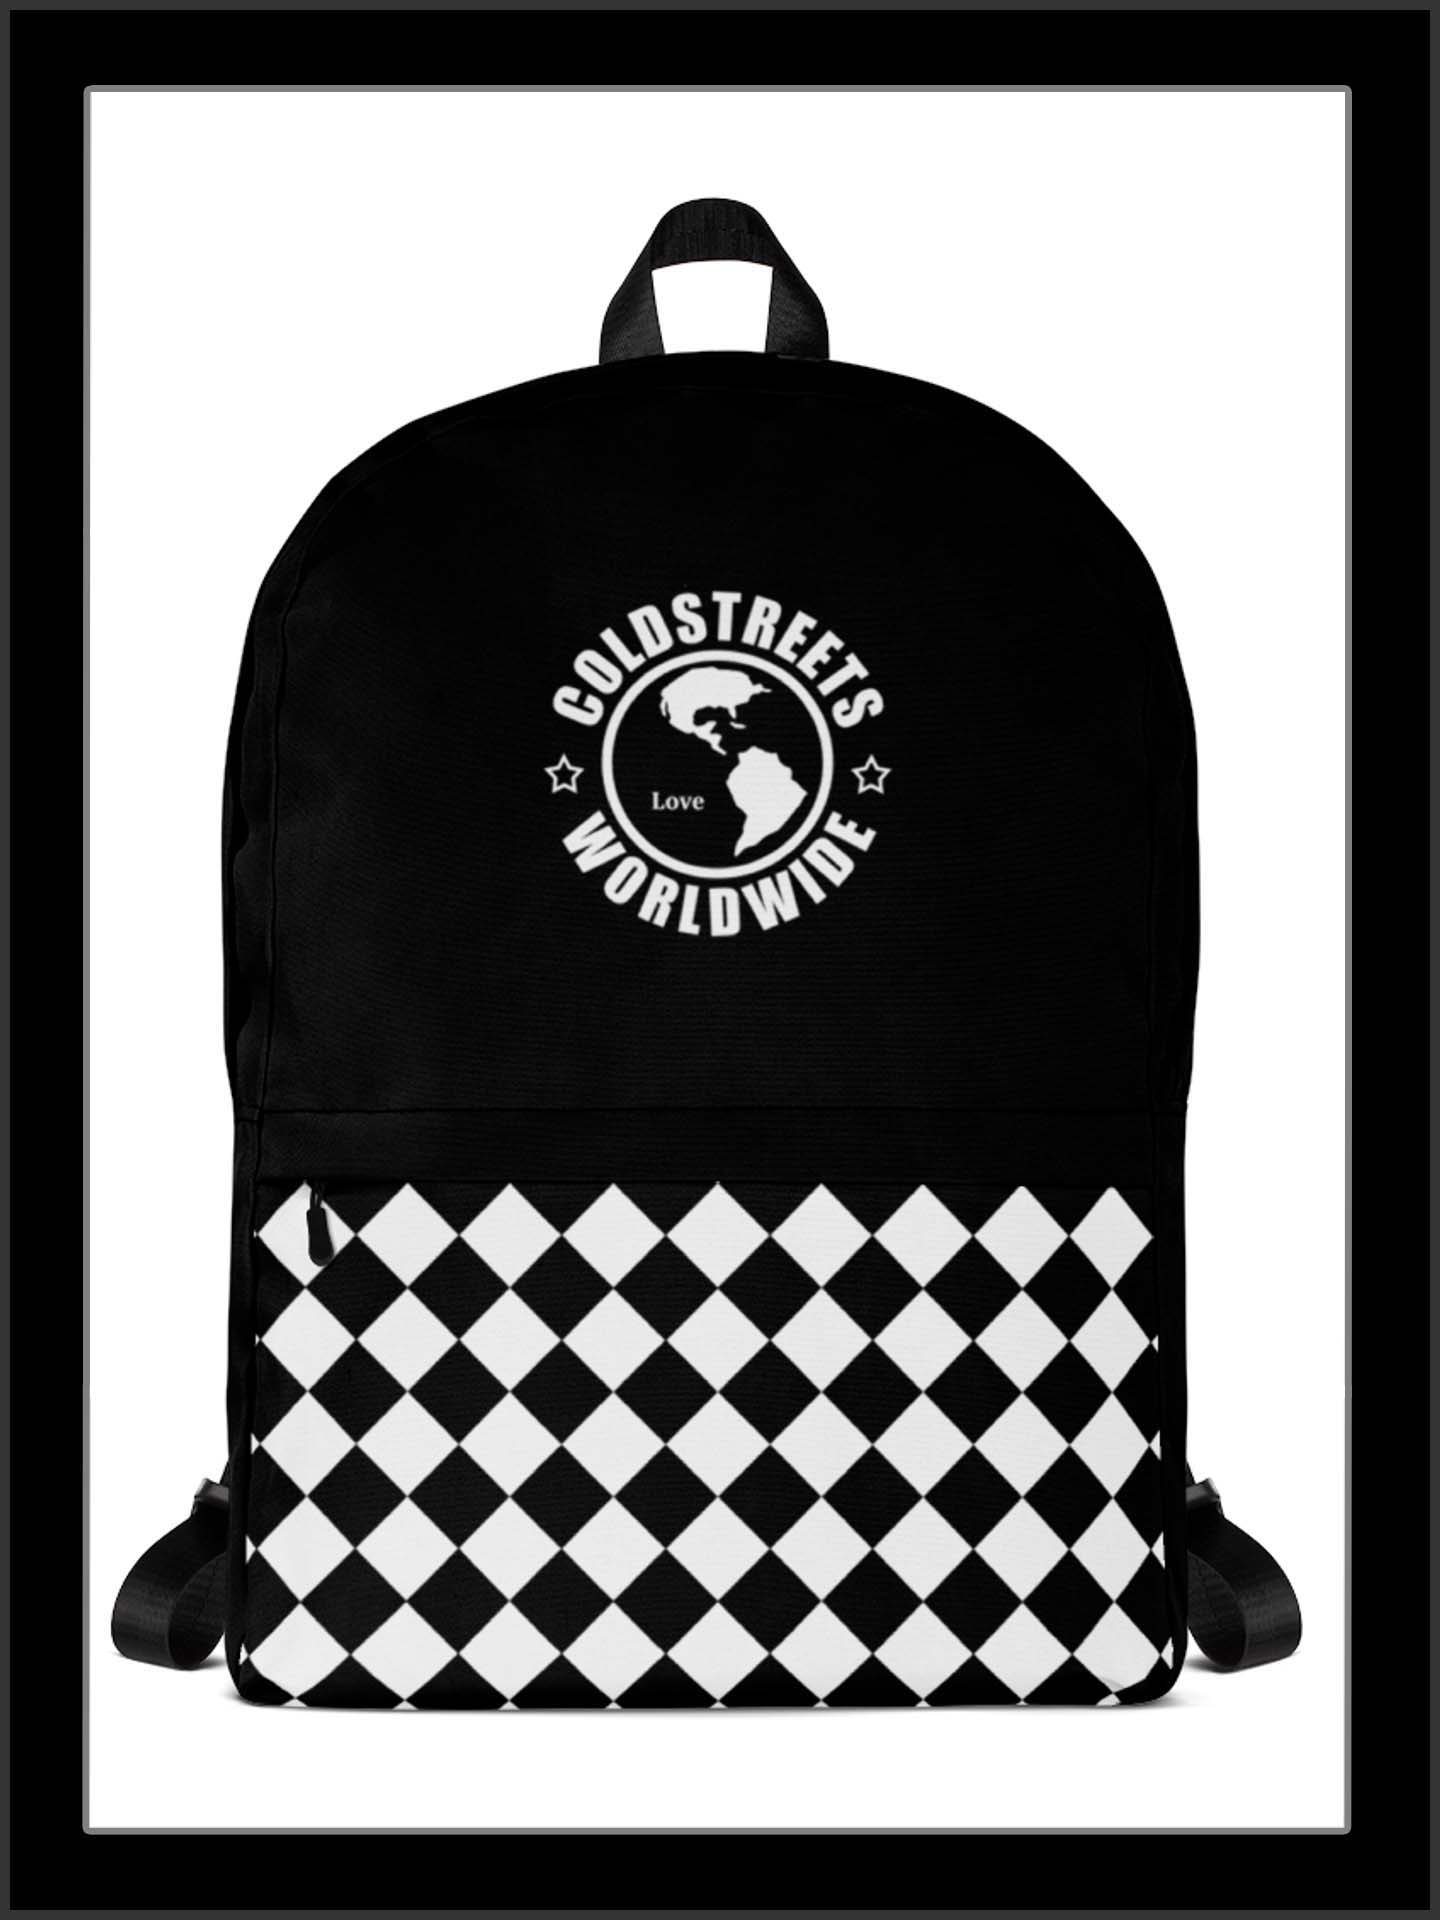 Cold Streets Nevada Backpacks